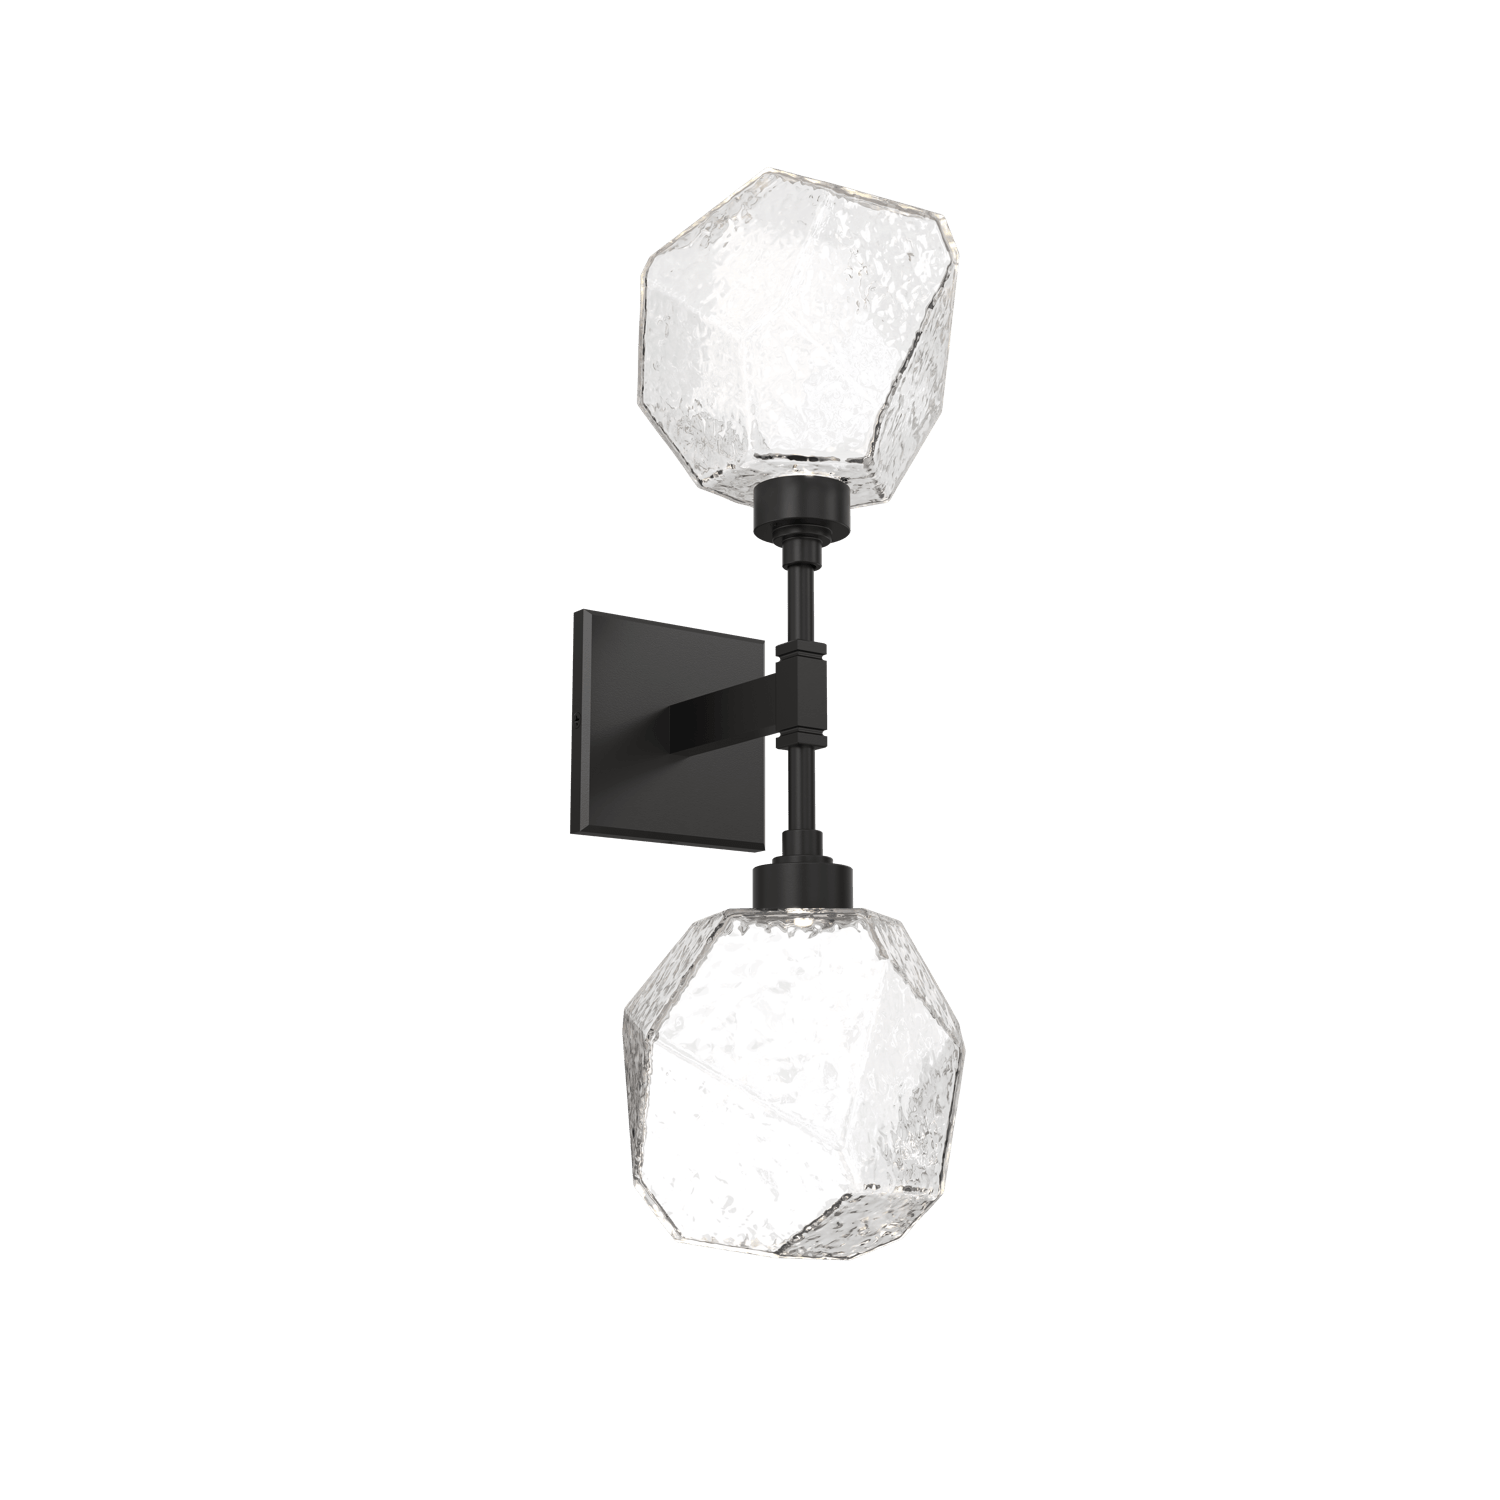 IDB0039-02-MB-C-Hammerton-Studio-Gem-double-wall-sconce-with-matte-black-finish-and-clear-blown-glass-shades-and-LED-lamping